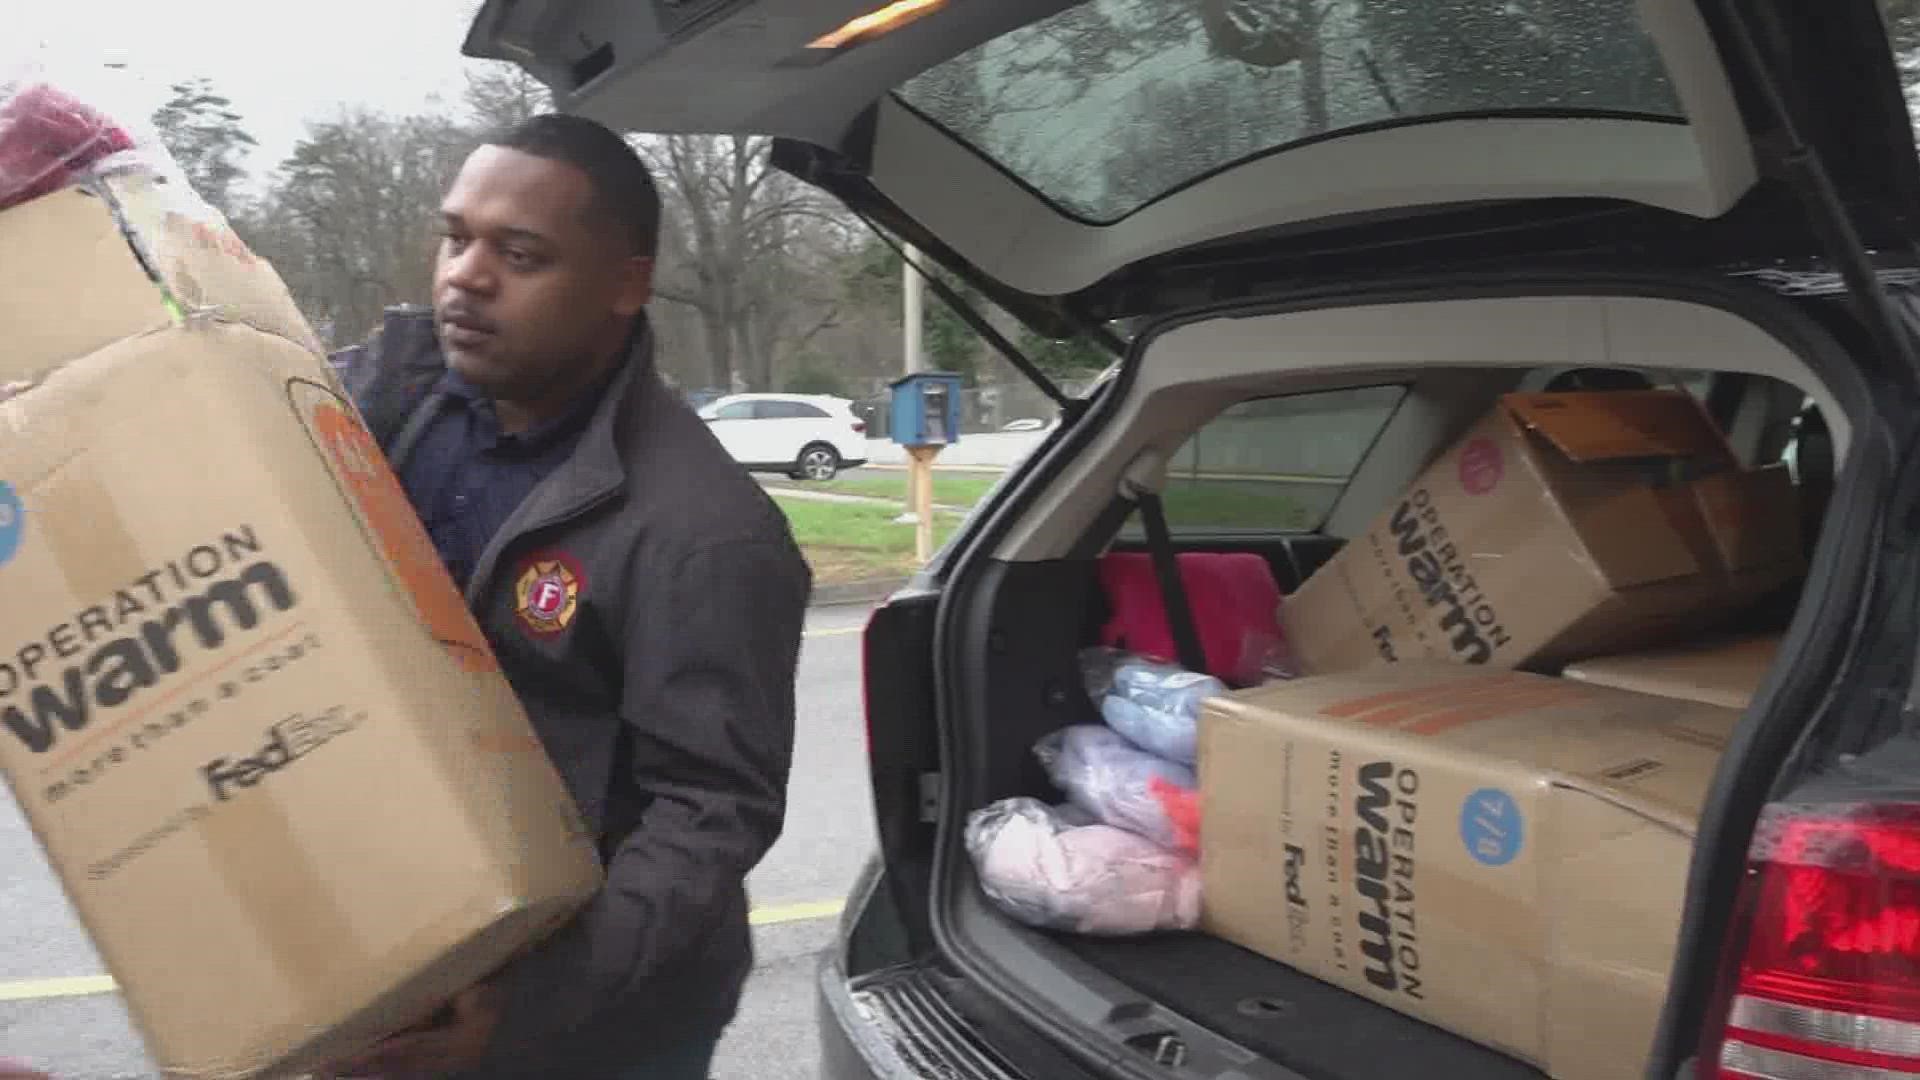 Firefighters unloaded the cars, giving around 350 coats to children at seven schools across Knoxville.